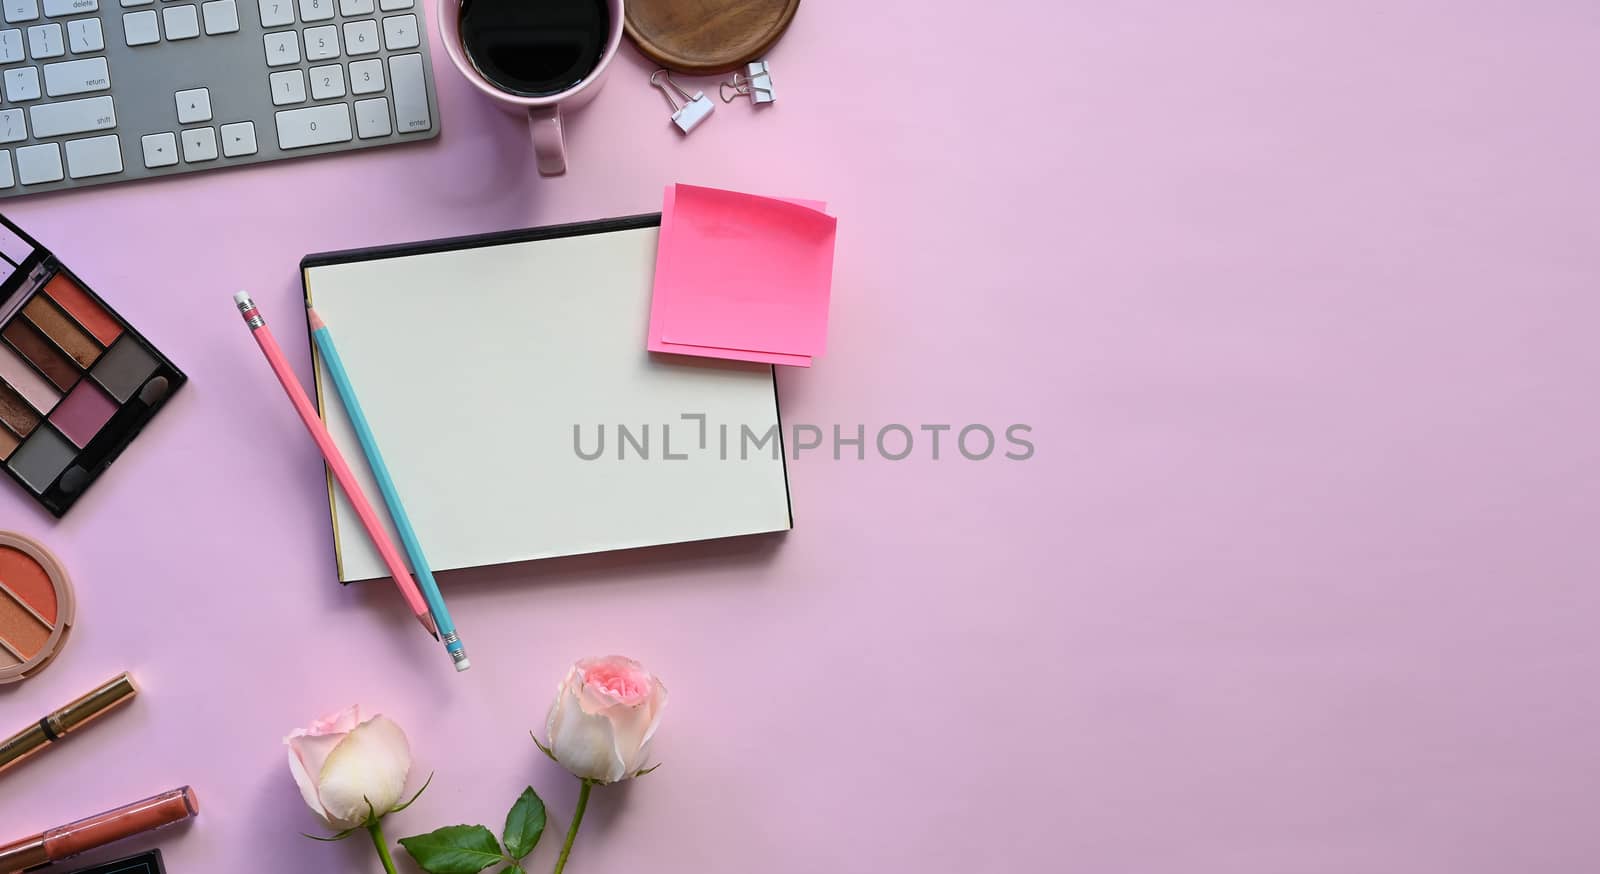 Top view image of feminine working desk including coffee cup, mo by prathanchorruangsak